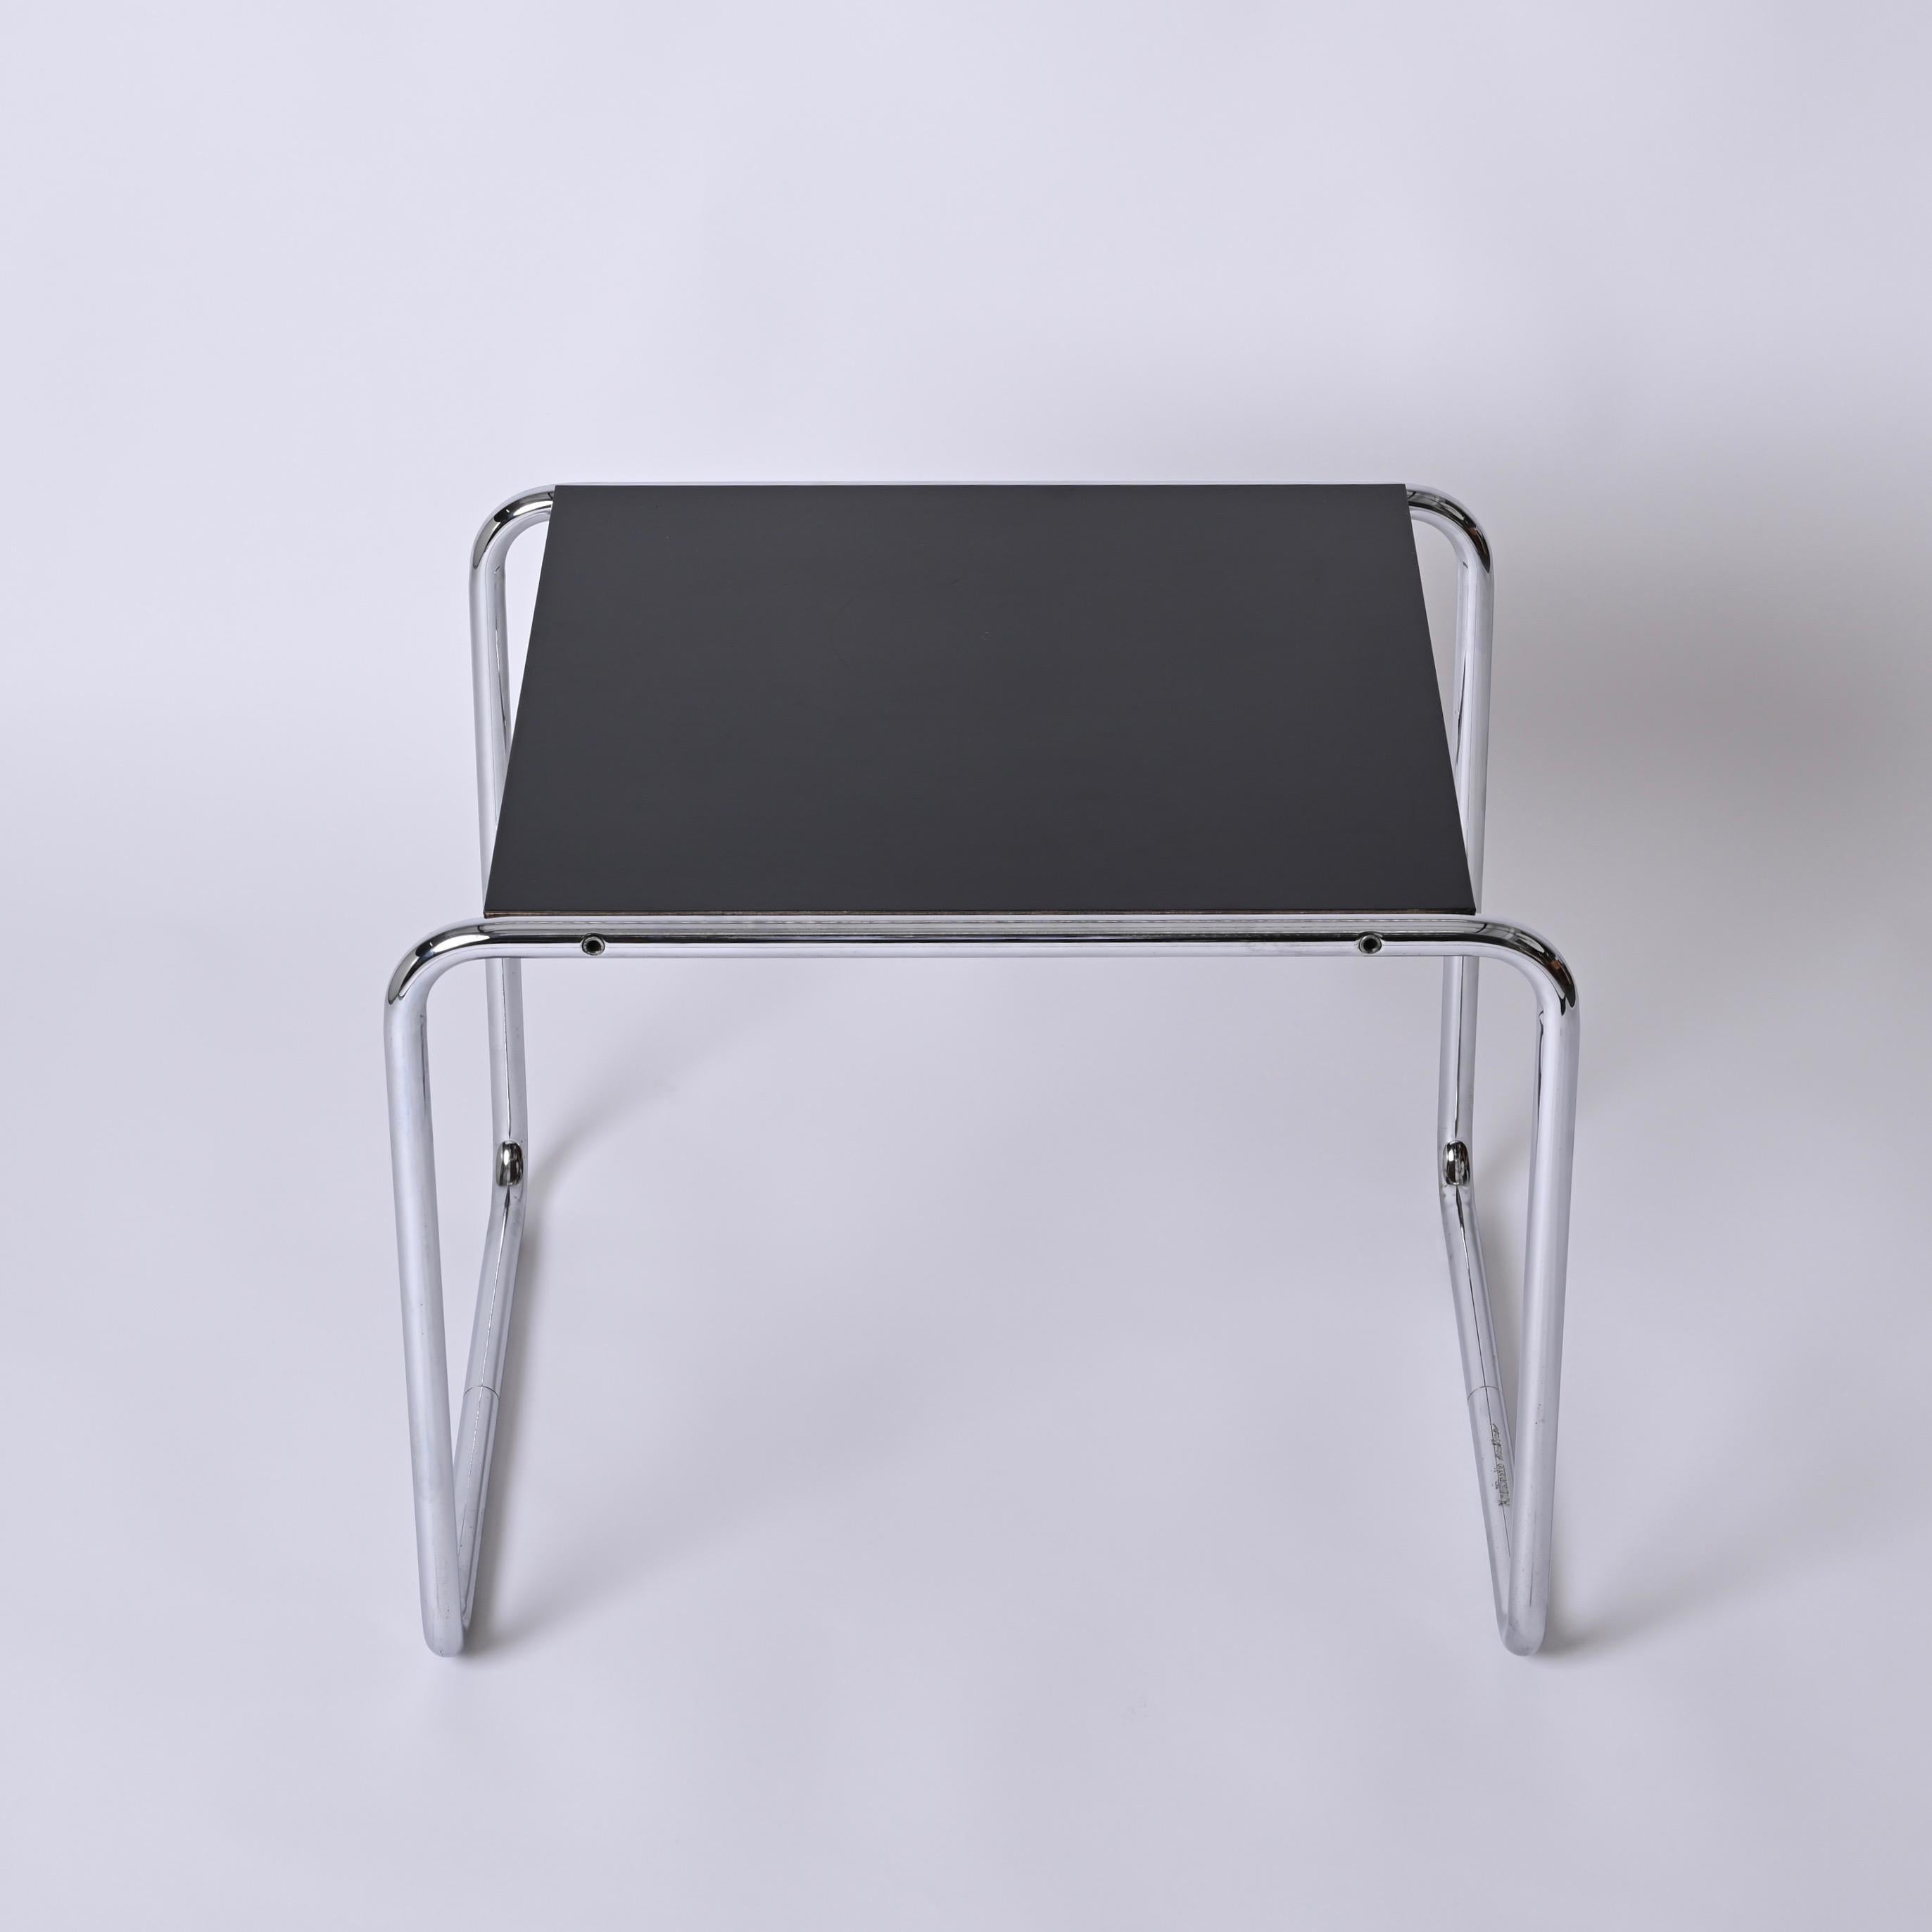 American Signed Marcel Breuer for Knoll, Bauhaus Black 'Laccio'  Side Table, USA 1940s